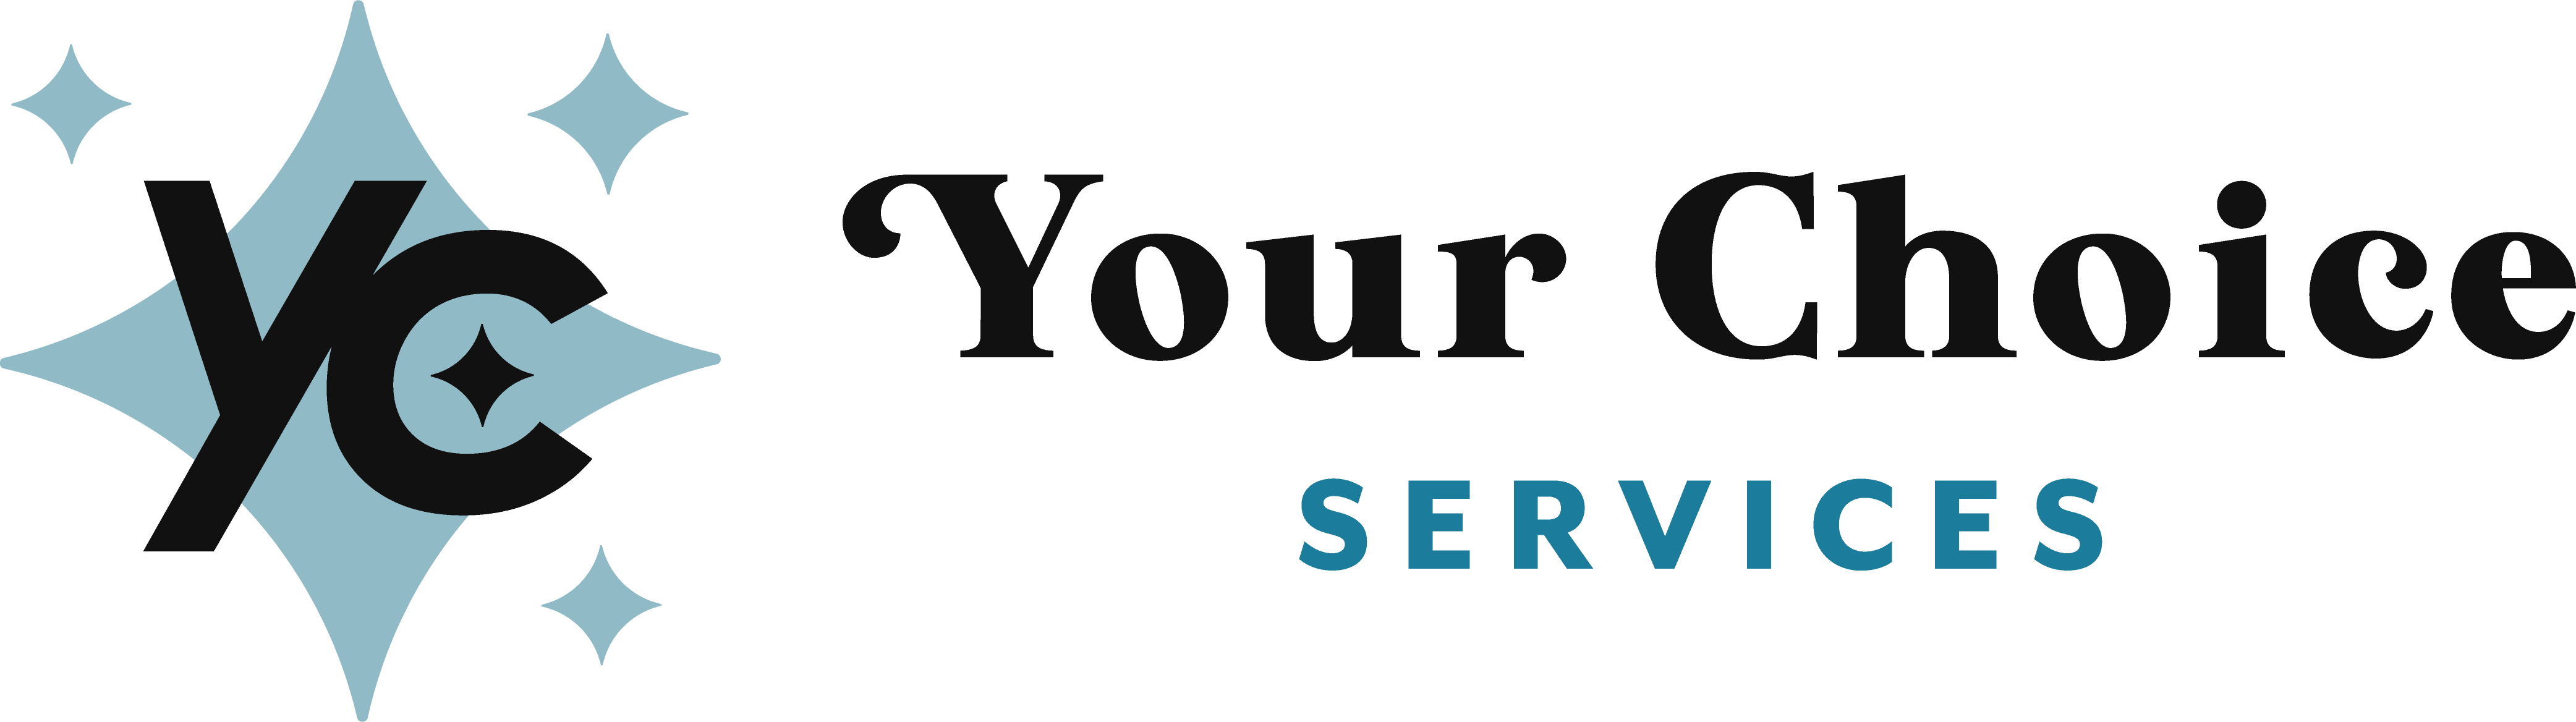 Your Choice Services Inc